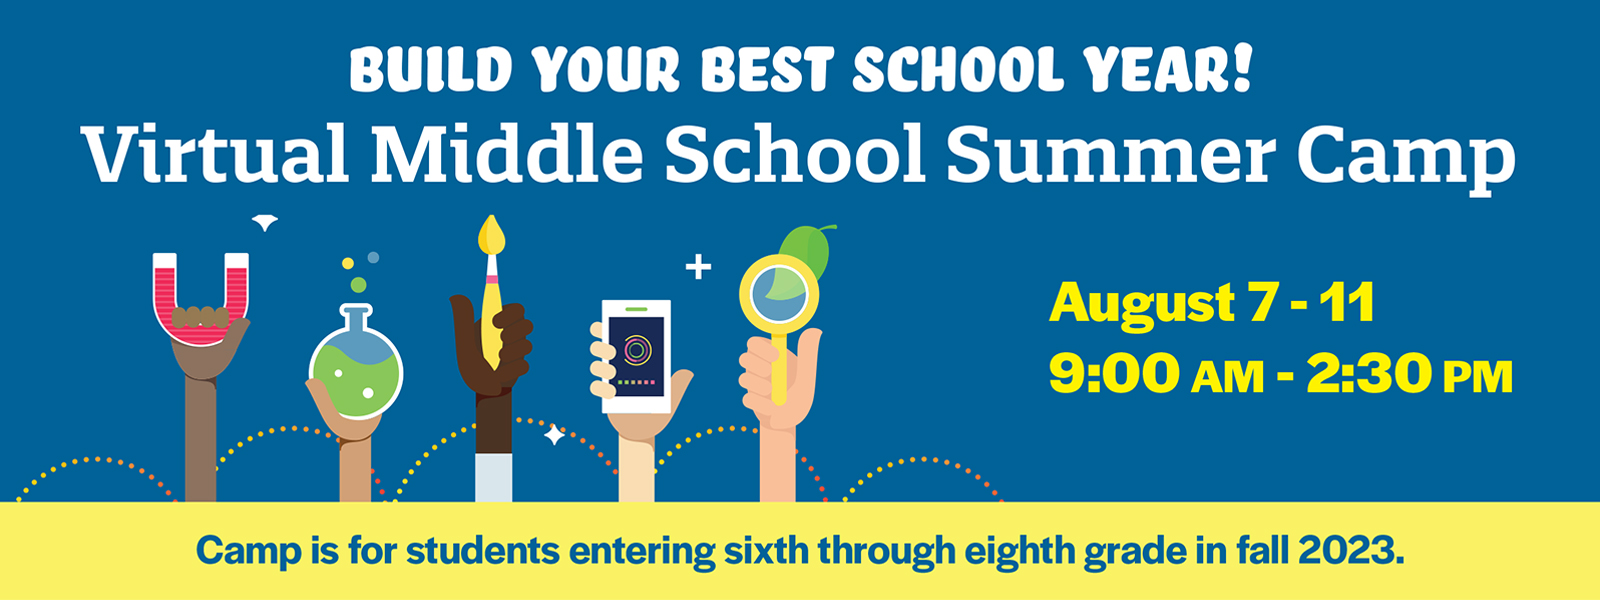 2023 Virtual Middle School Summer Camp: Build Your Best School Year! August 7-11, 9 a.m. – 2:30 p.m. Camp is for students entering sixth through eighth grade in fall 2023.